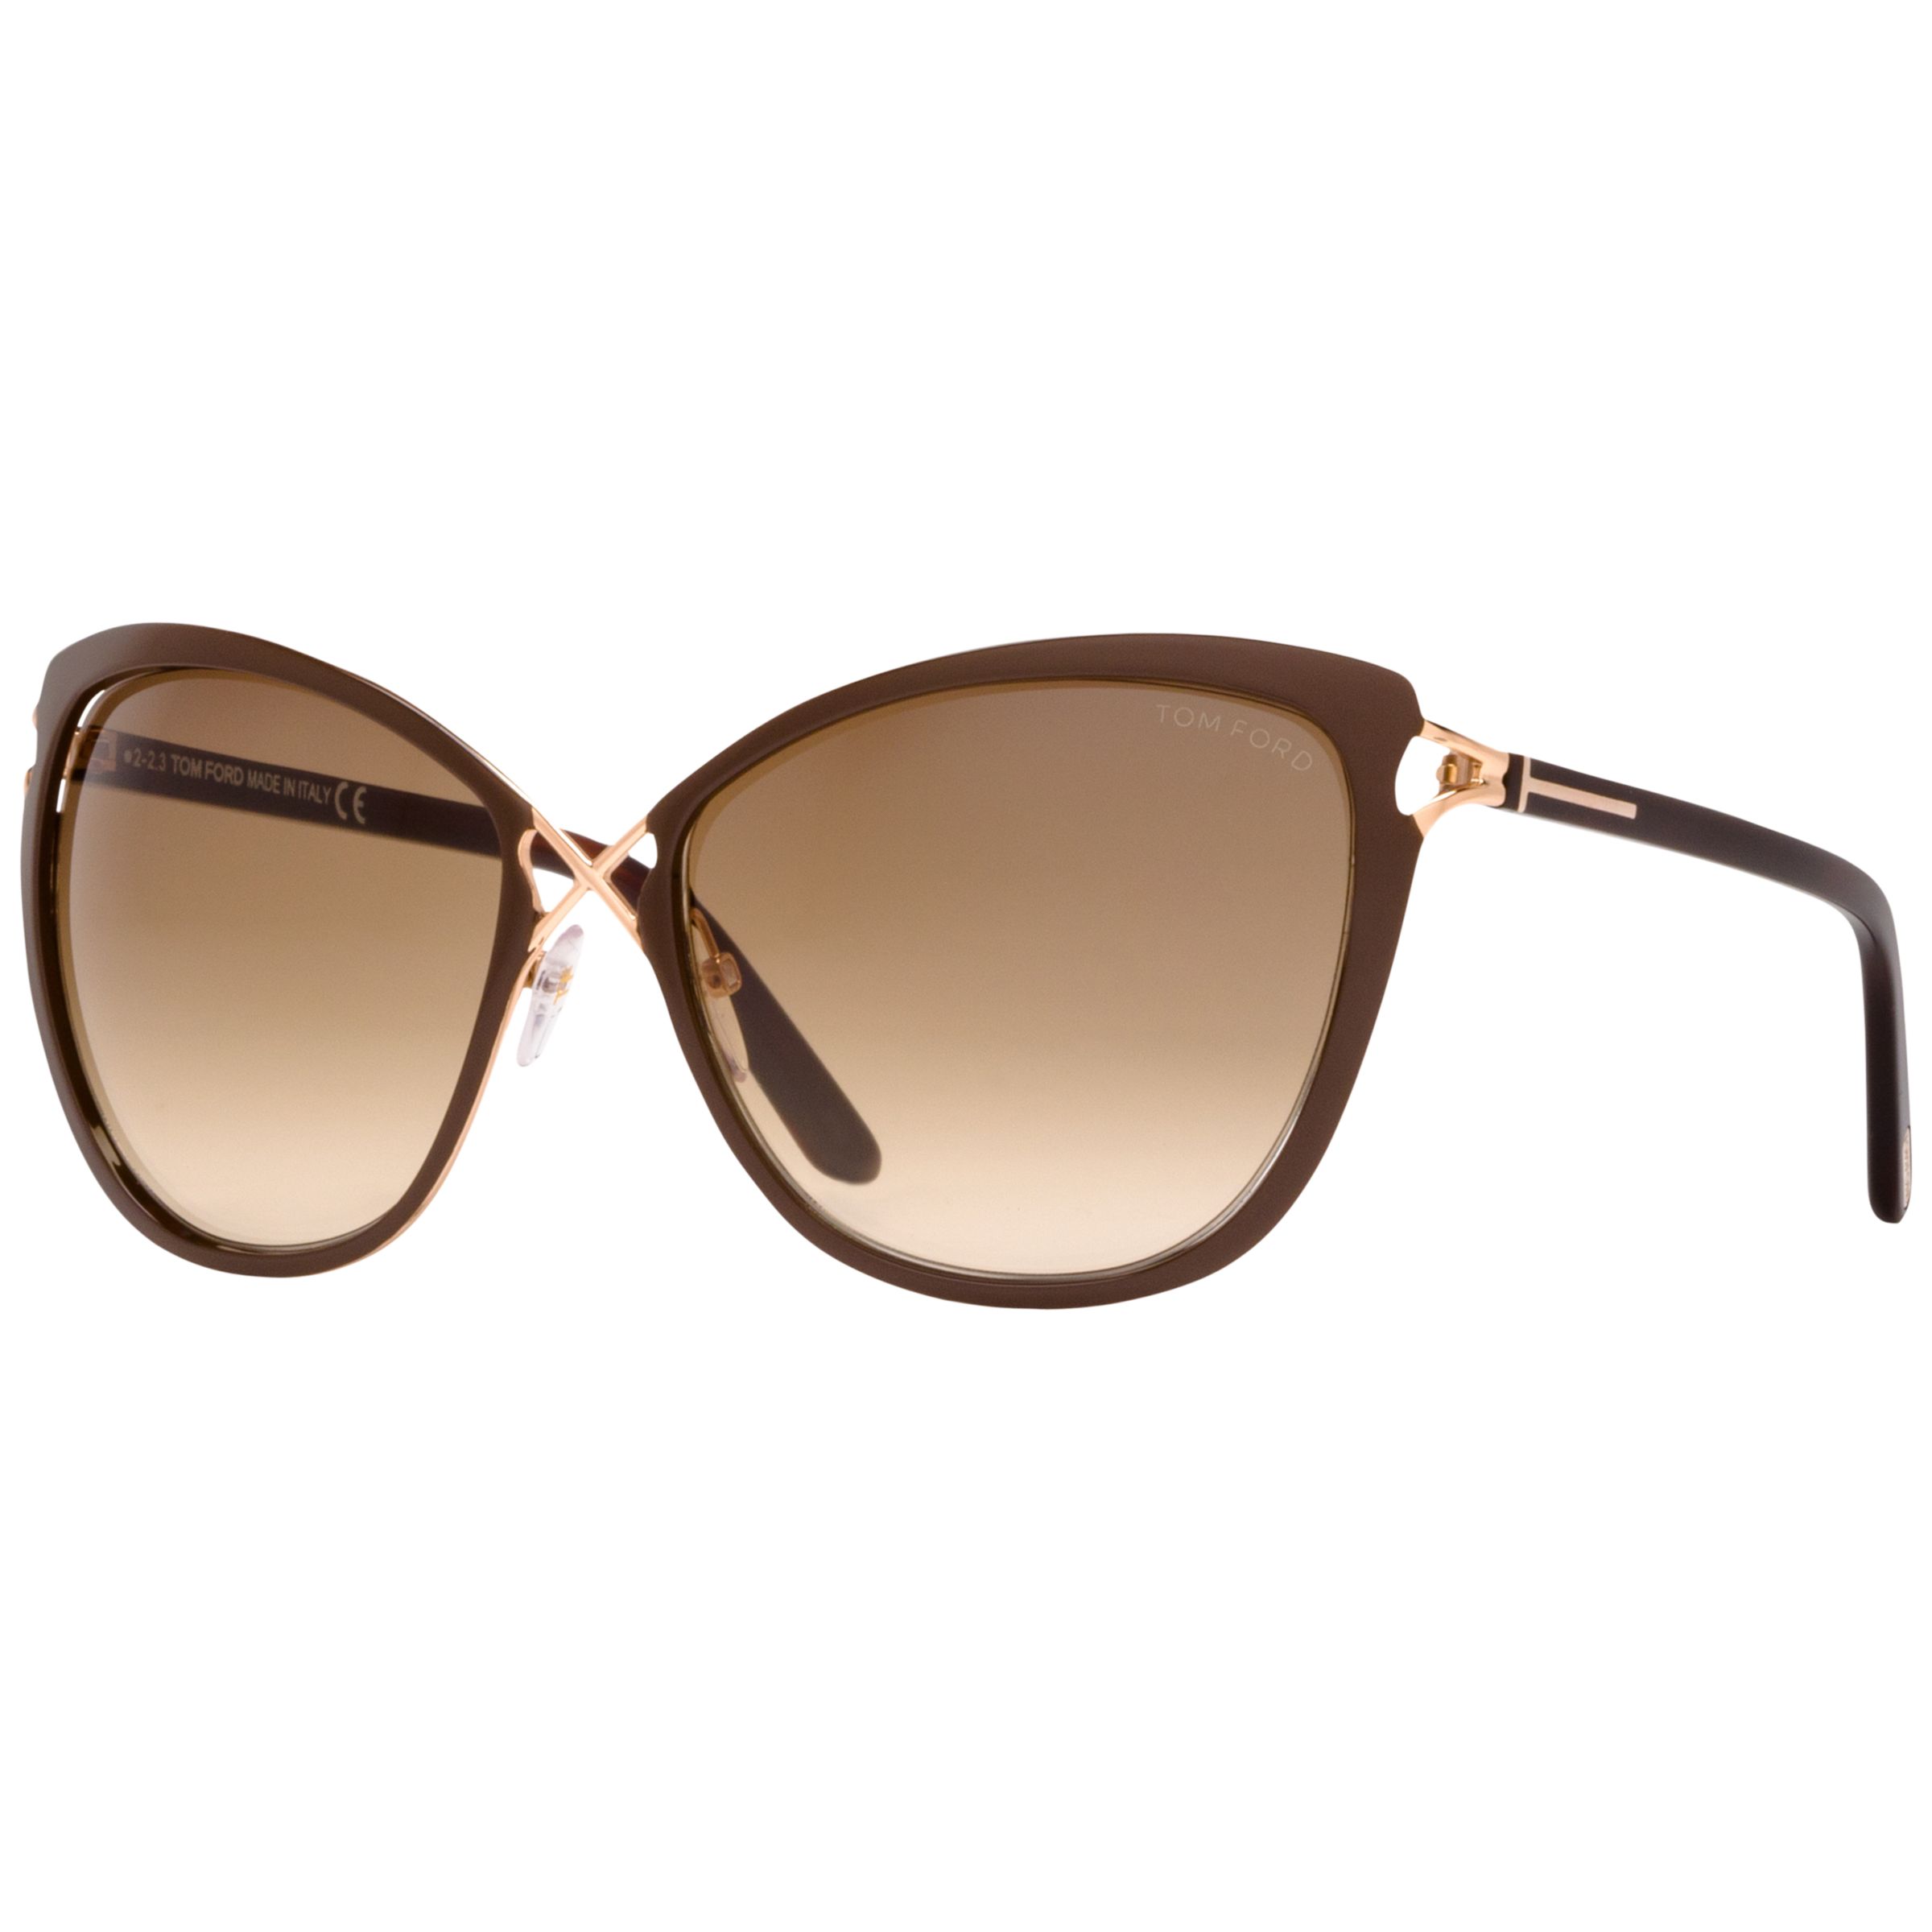 TOM FORD FT0322 Celia Butterfly Sunglasses, Gold/Beige